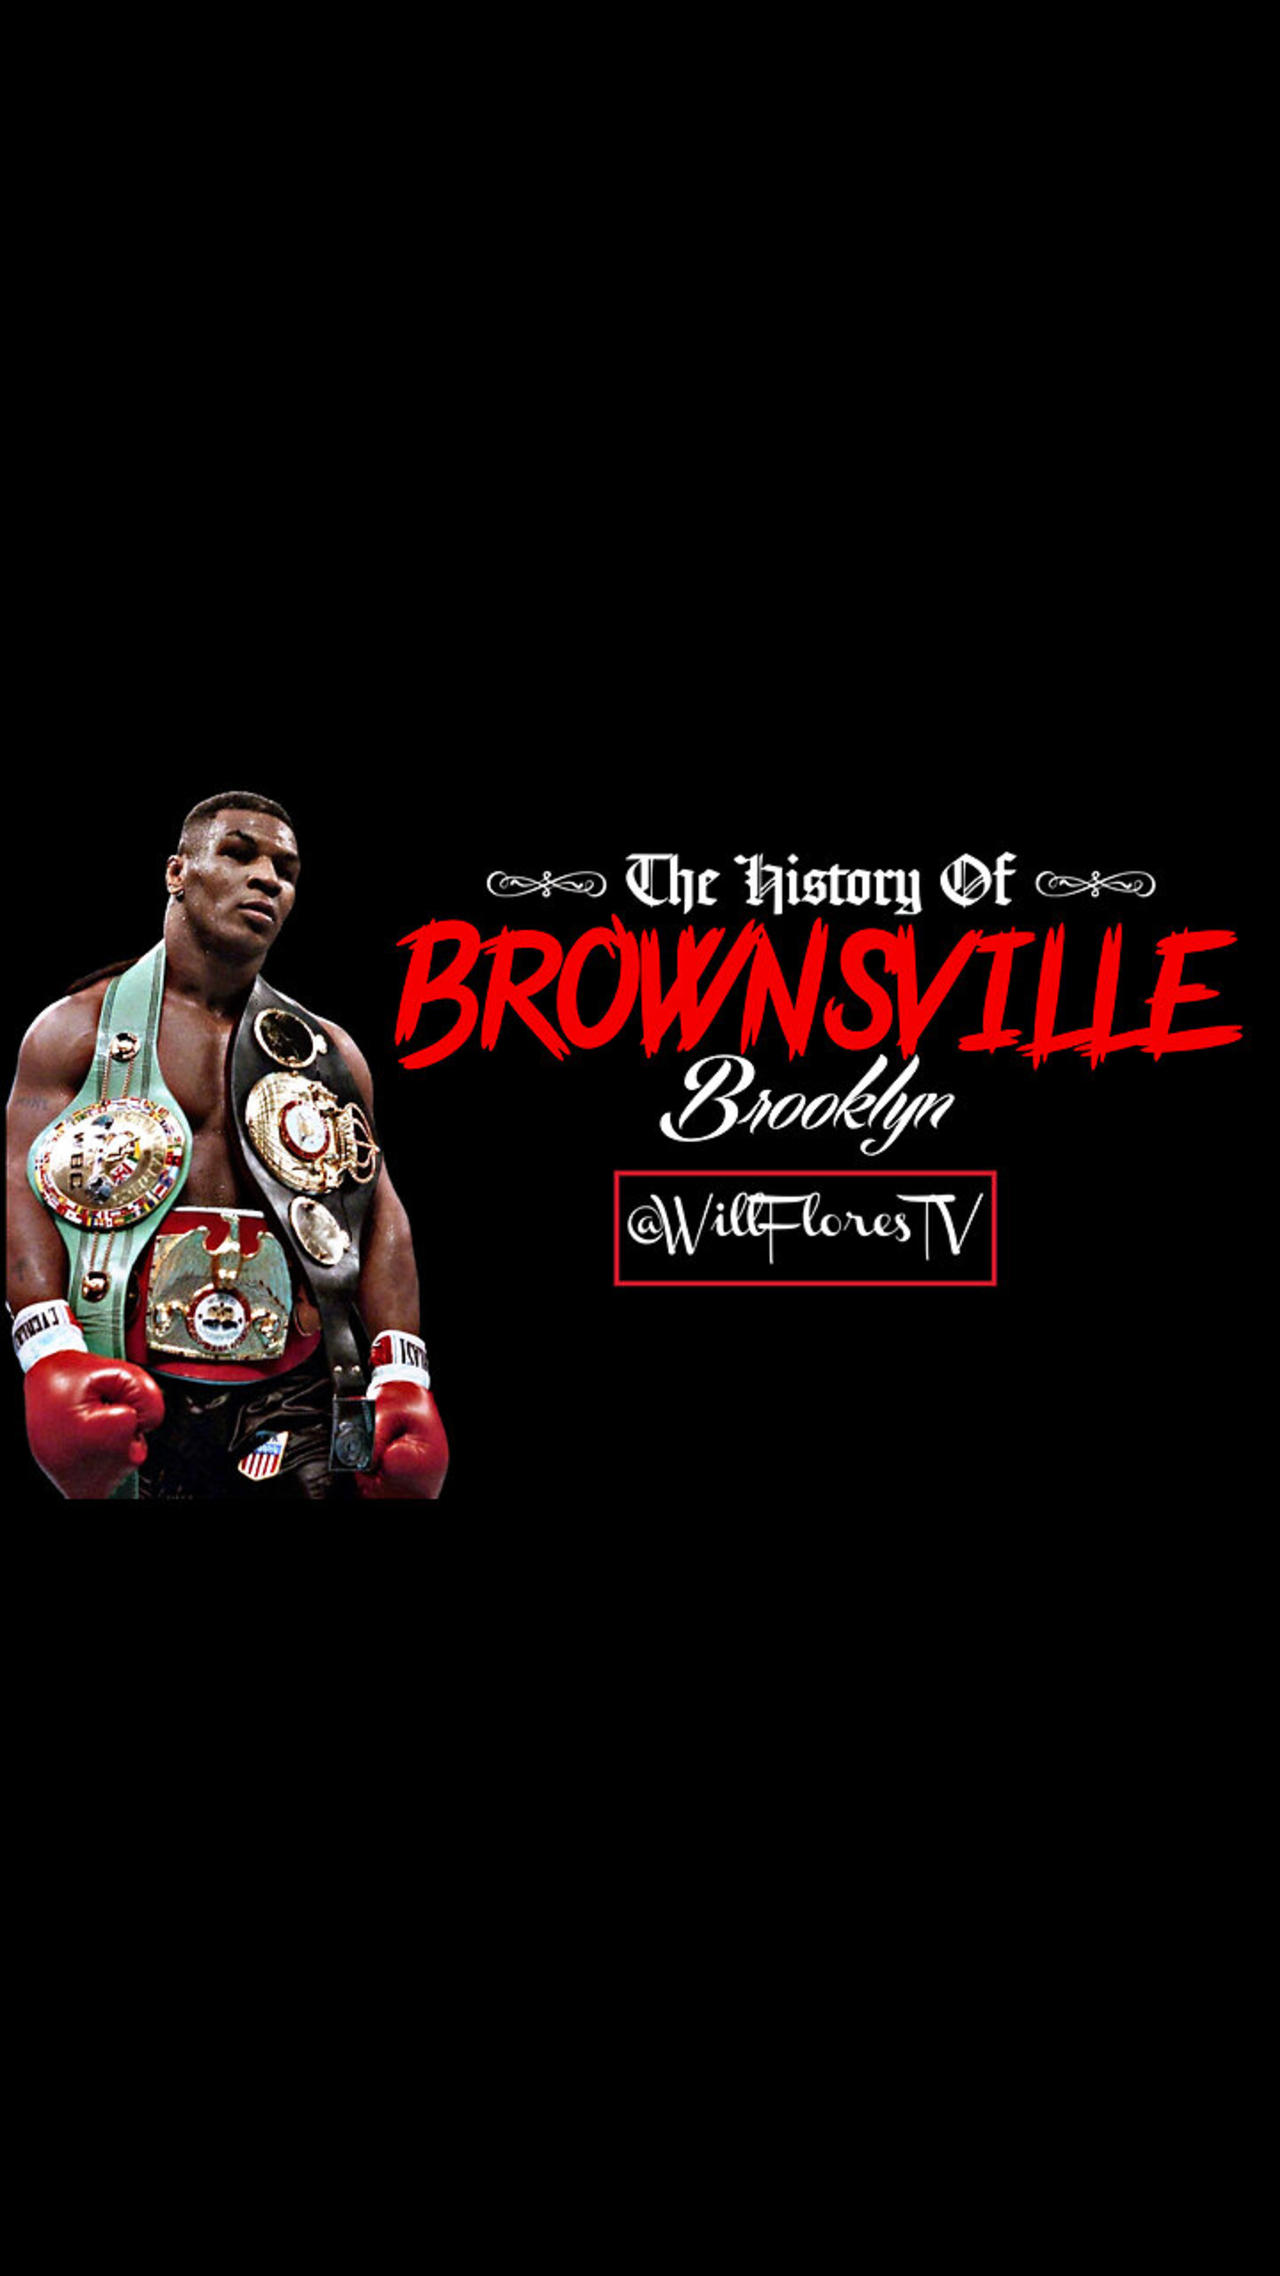 The History Of Brownsville (Brooklyn, NY) 🗽 #DidYouKnow